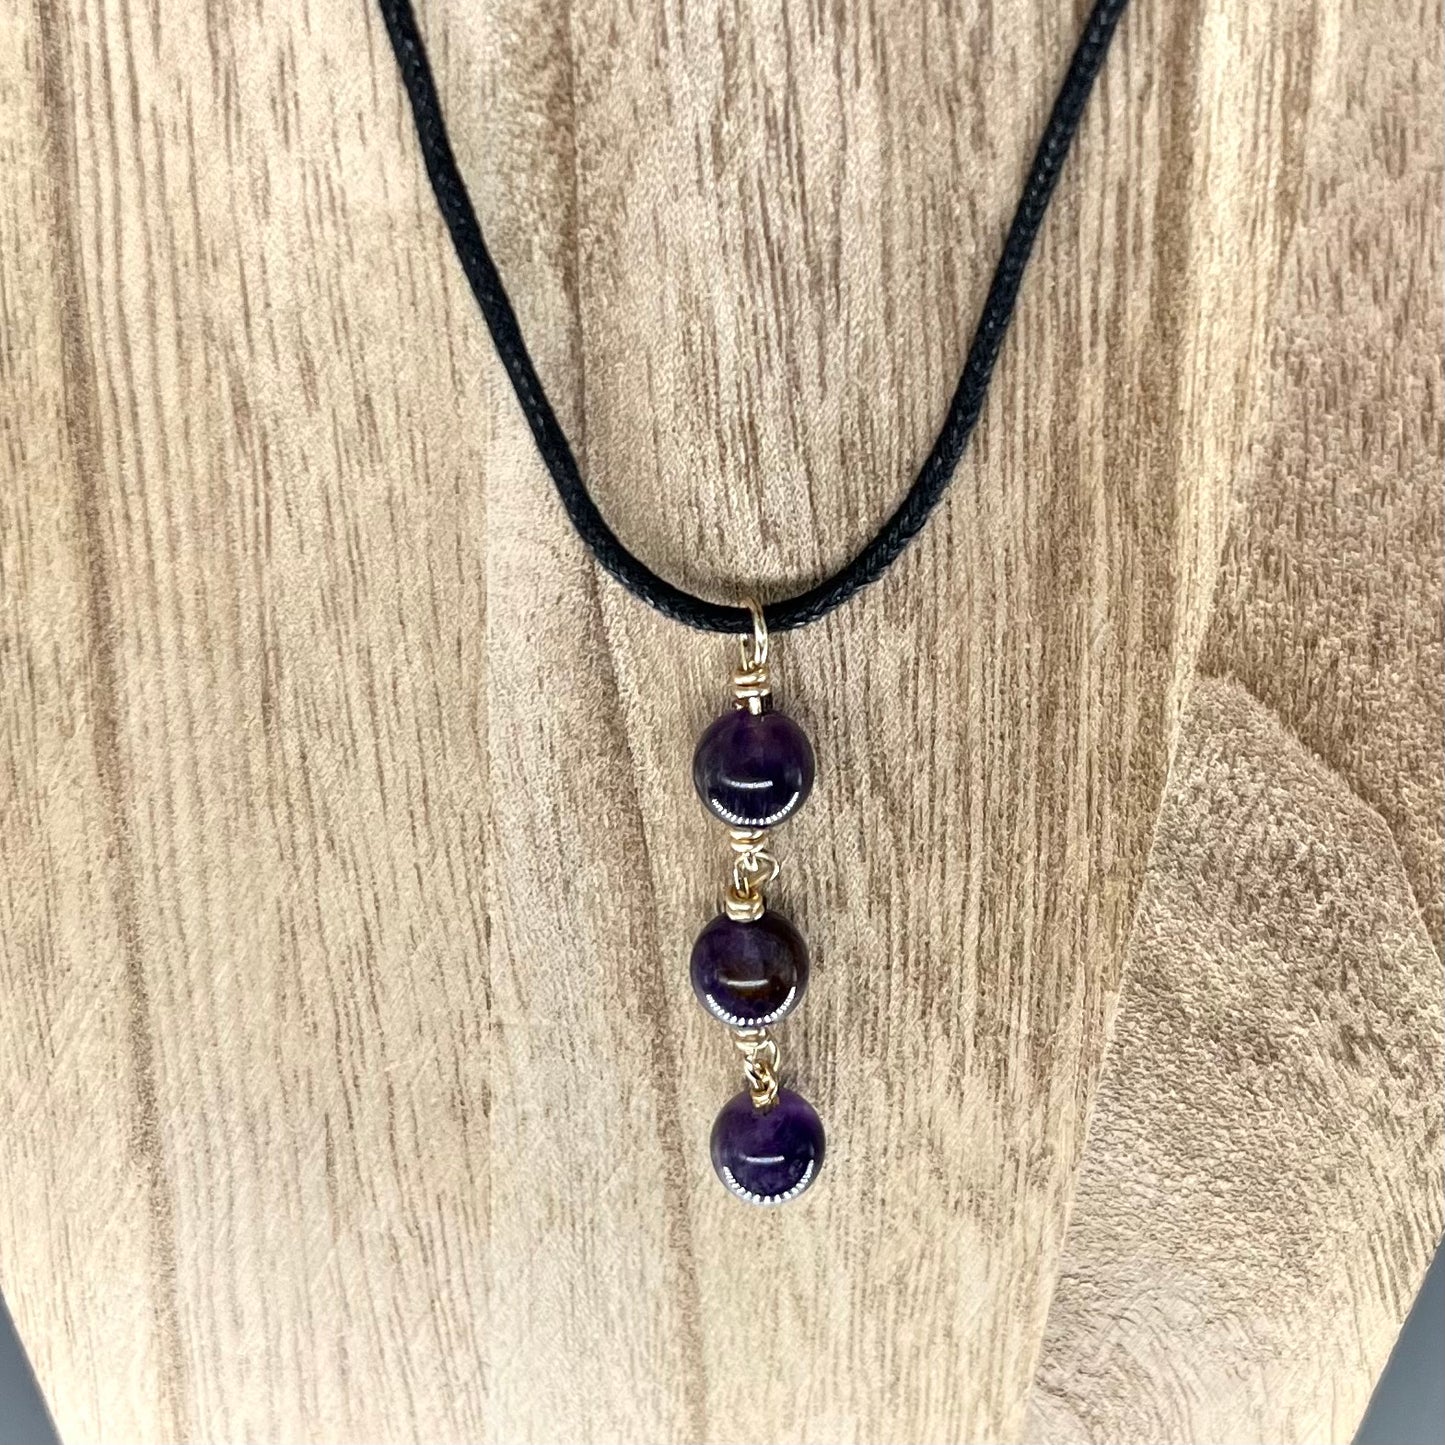 Amethyst Necklace on an Adjustable Black Cotton Cord